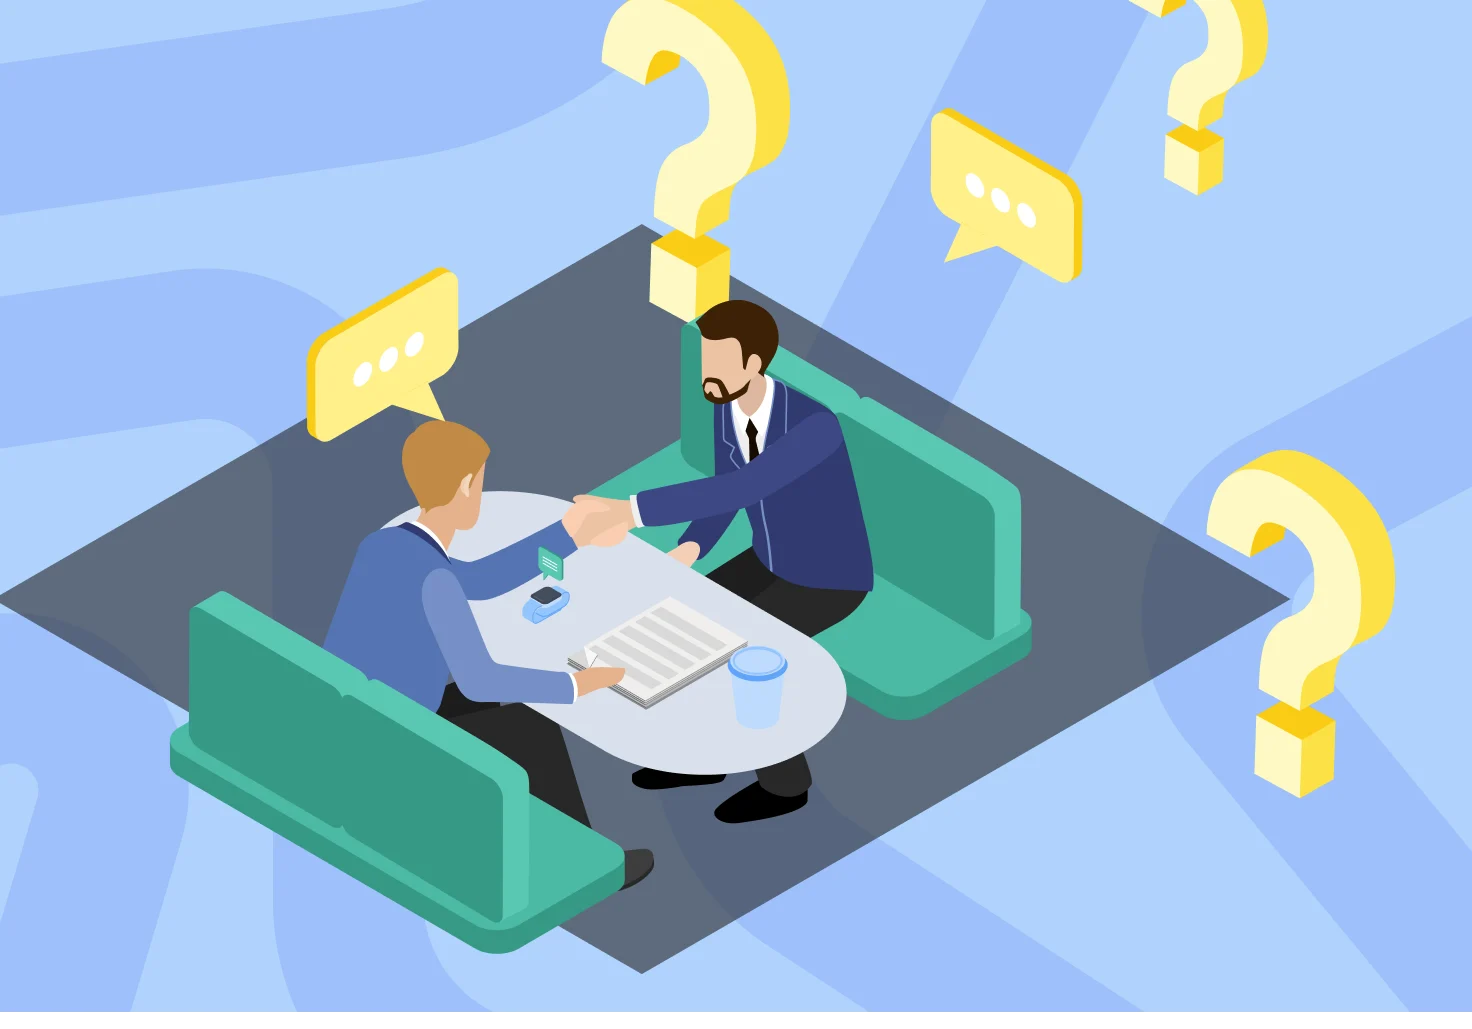 questions to ask an interviewer